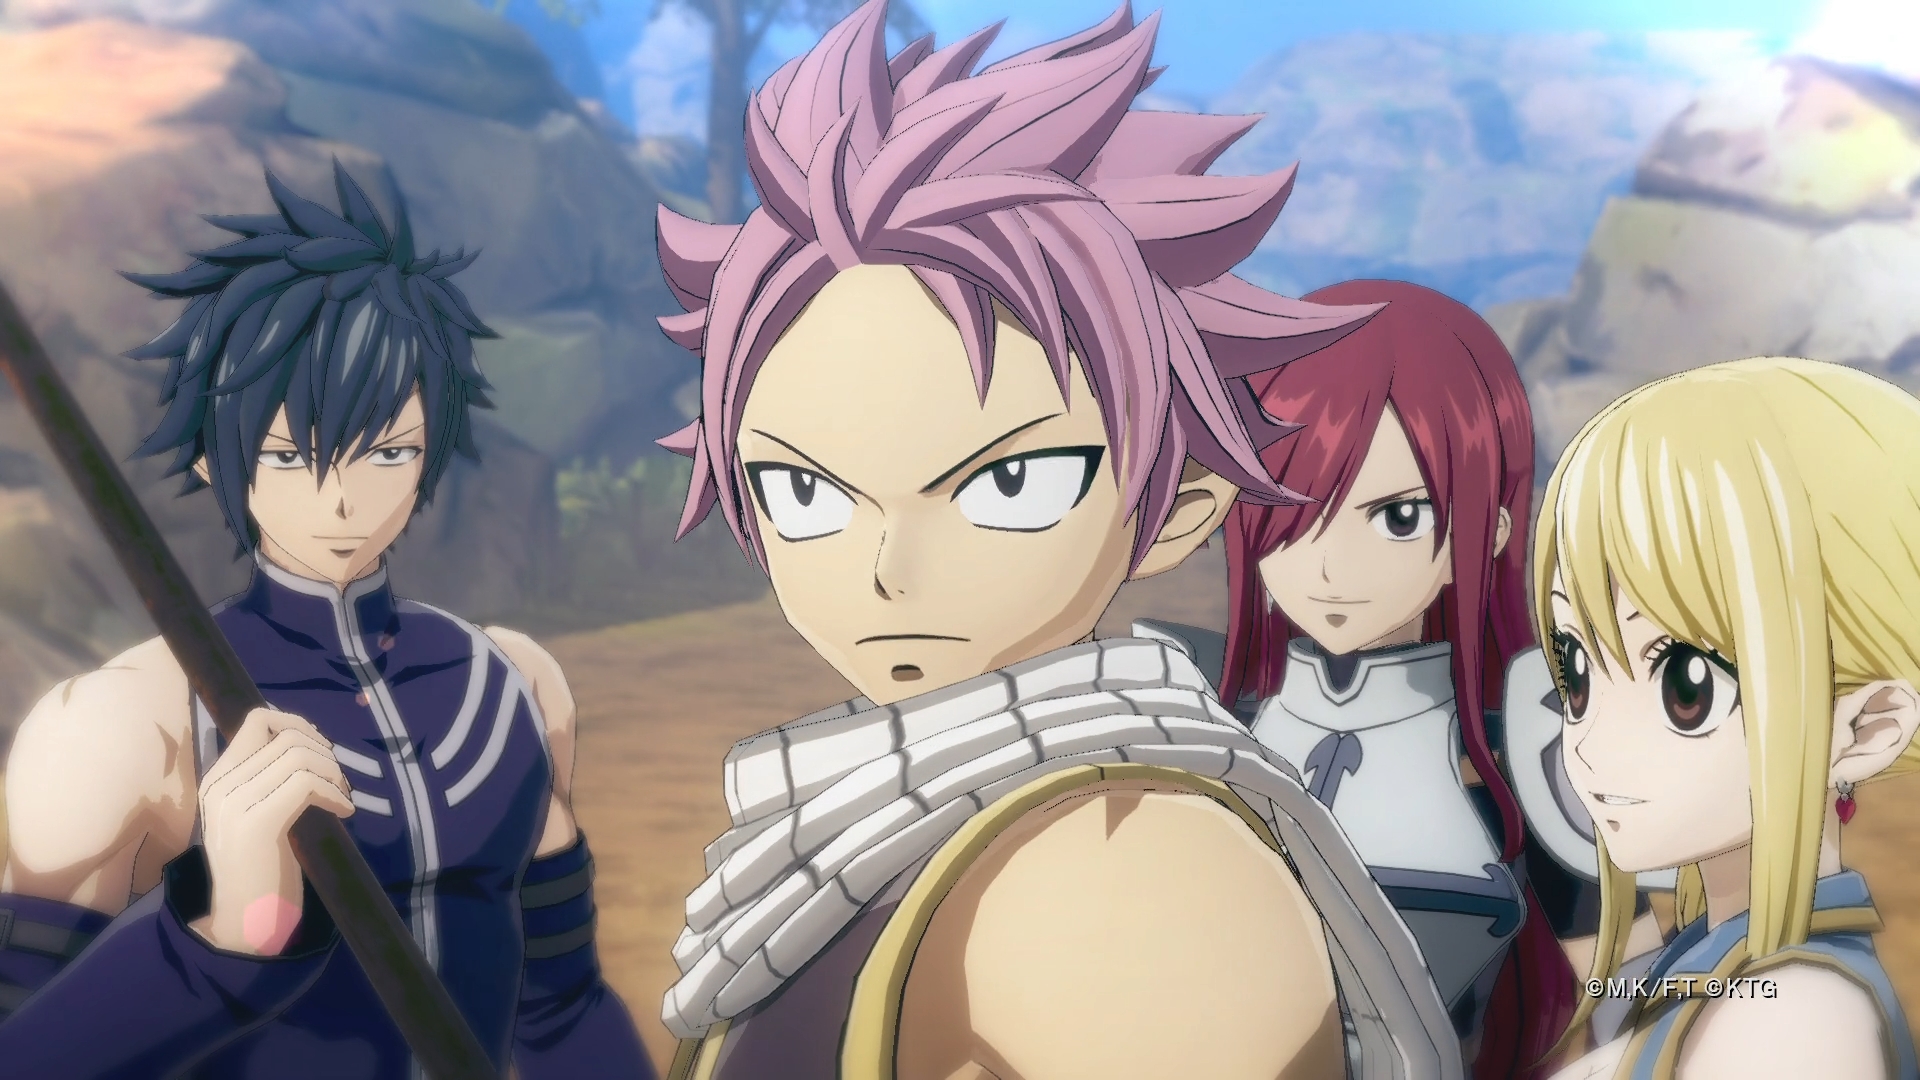 Fairy Tail Game Delayed in Japan From June 25 to July 30, 2020 - Siliconera